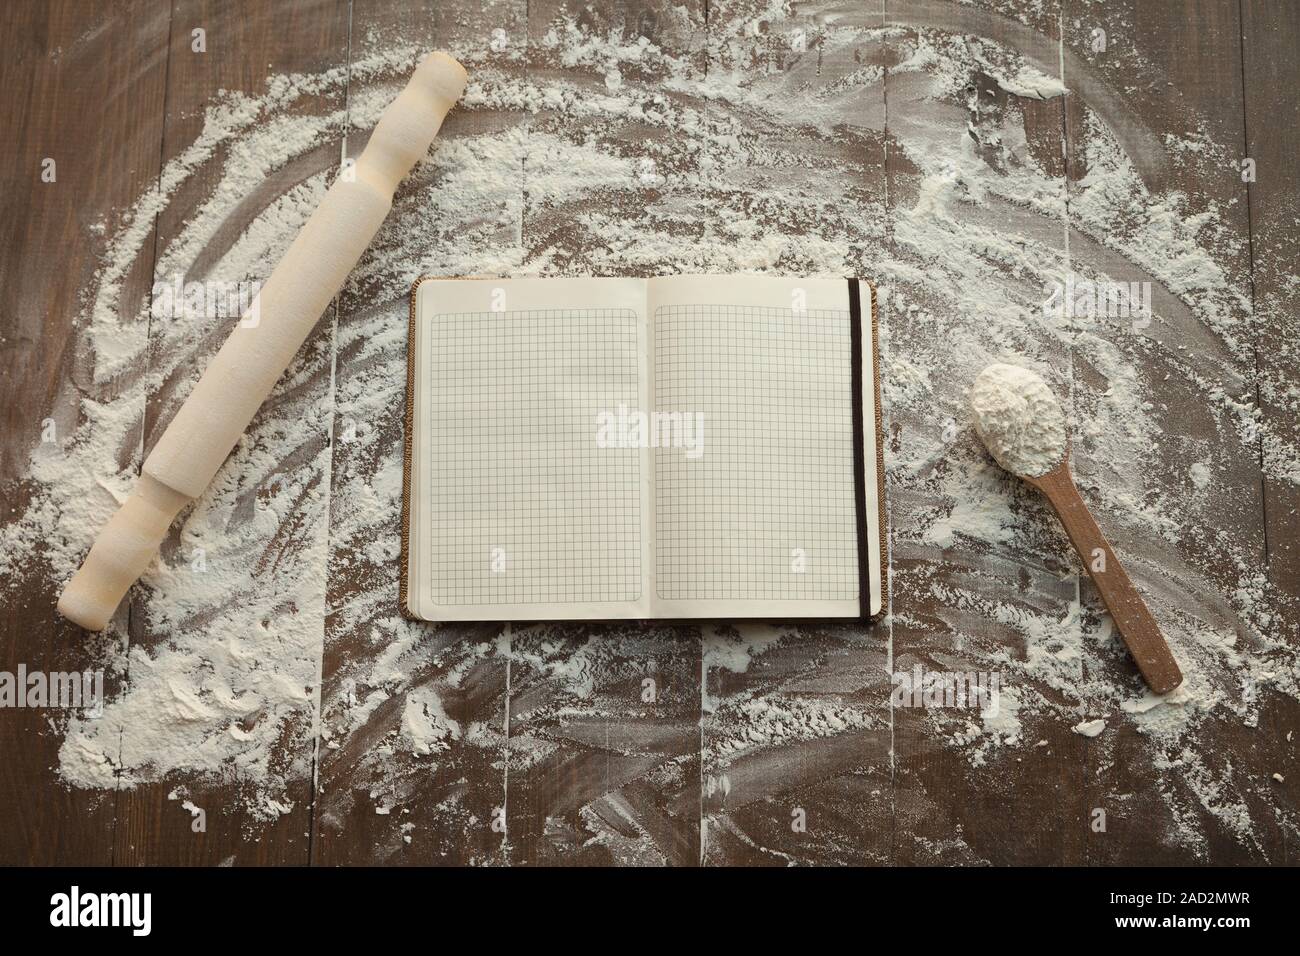 Composition of clear open recipe book in middle and rolling pin with spoon by sides on floured table. Stock Photo